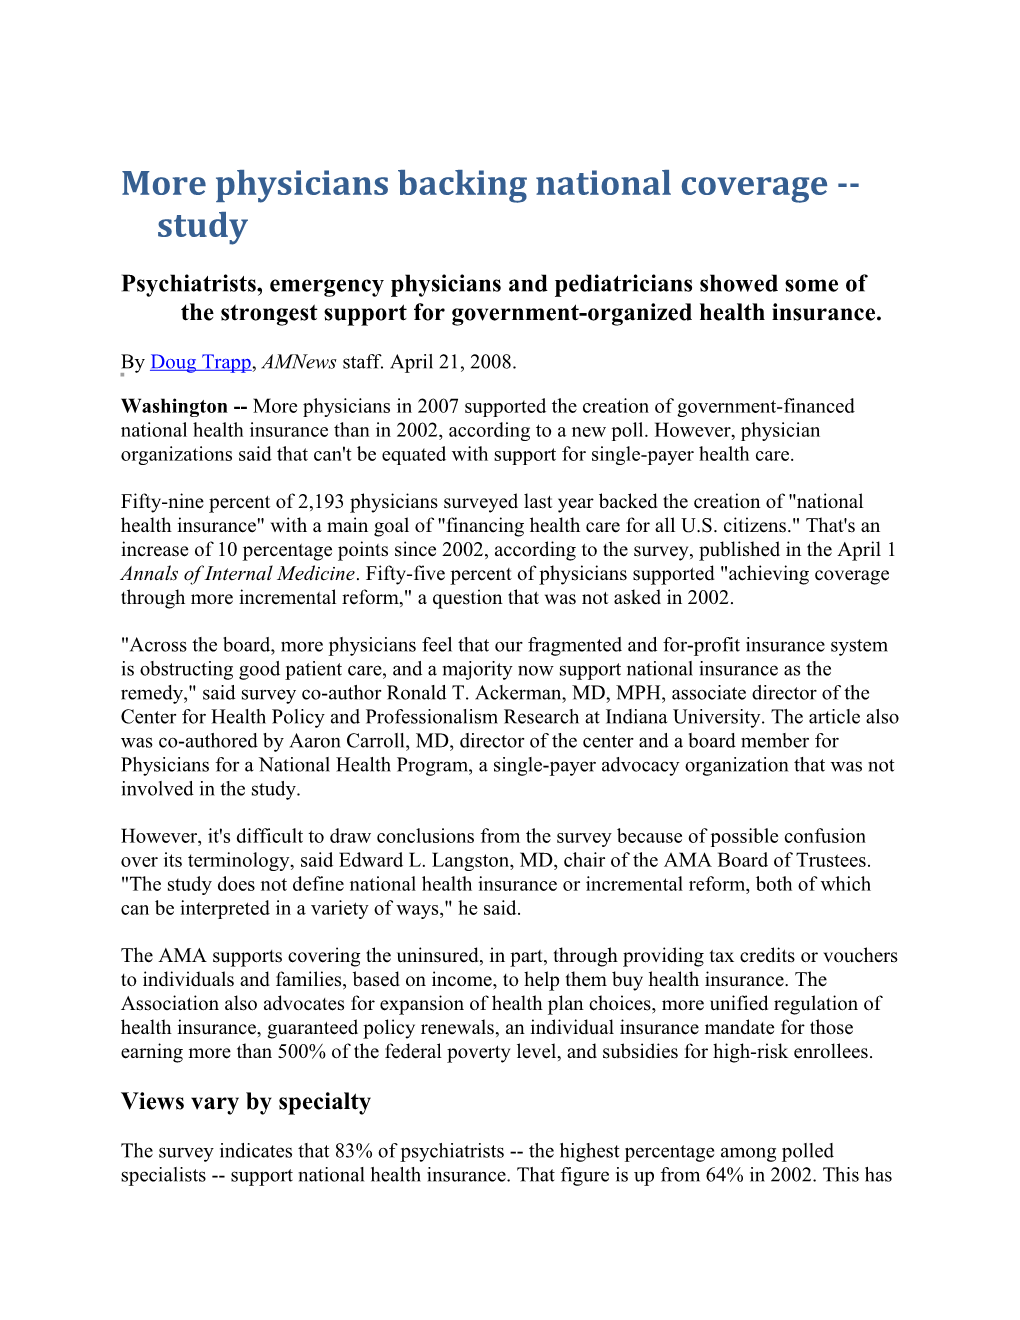 More Physicians Backing National Coverage Study